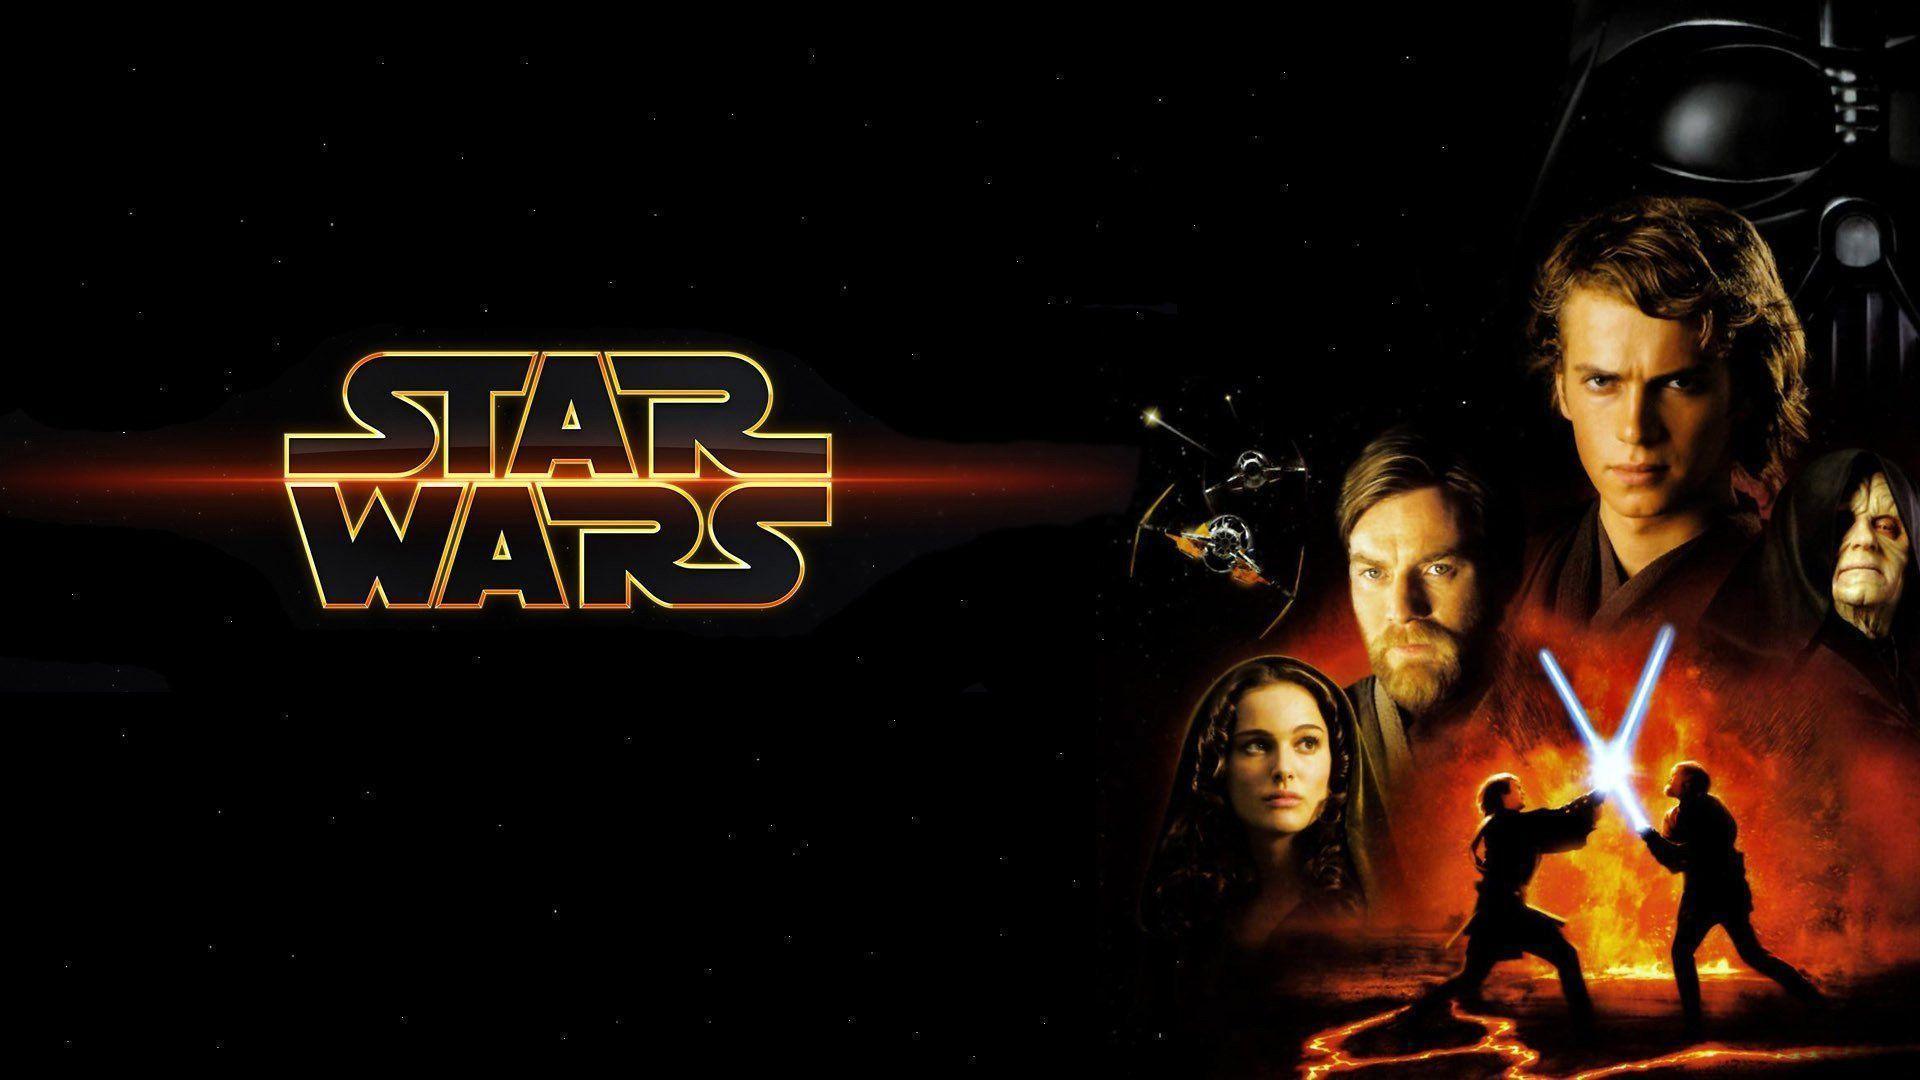 Star Wars: Episode III – Revenge Of The Sith Wallpapers - Wallpaper Cave